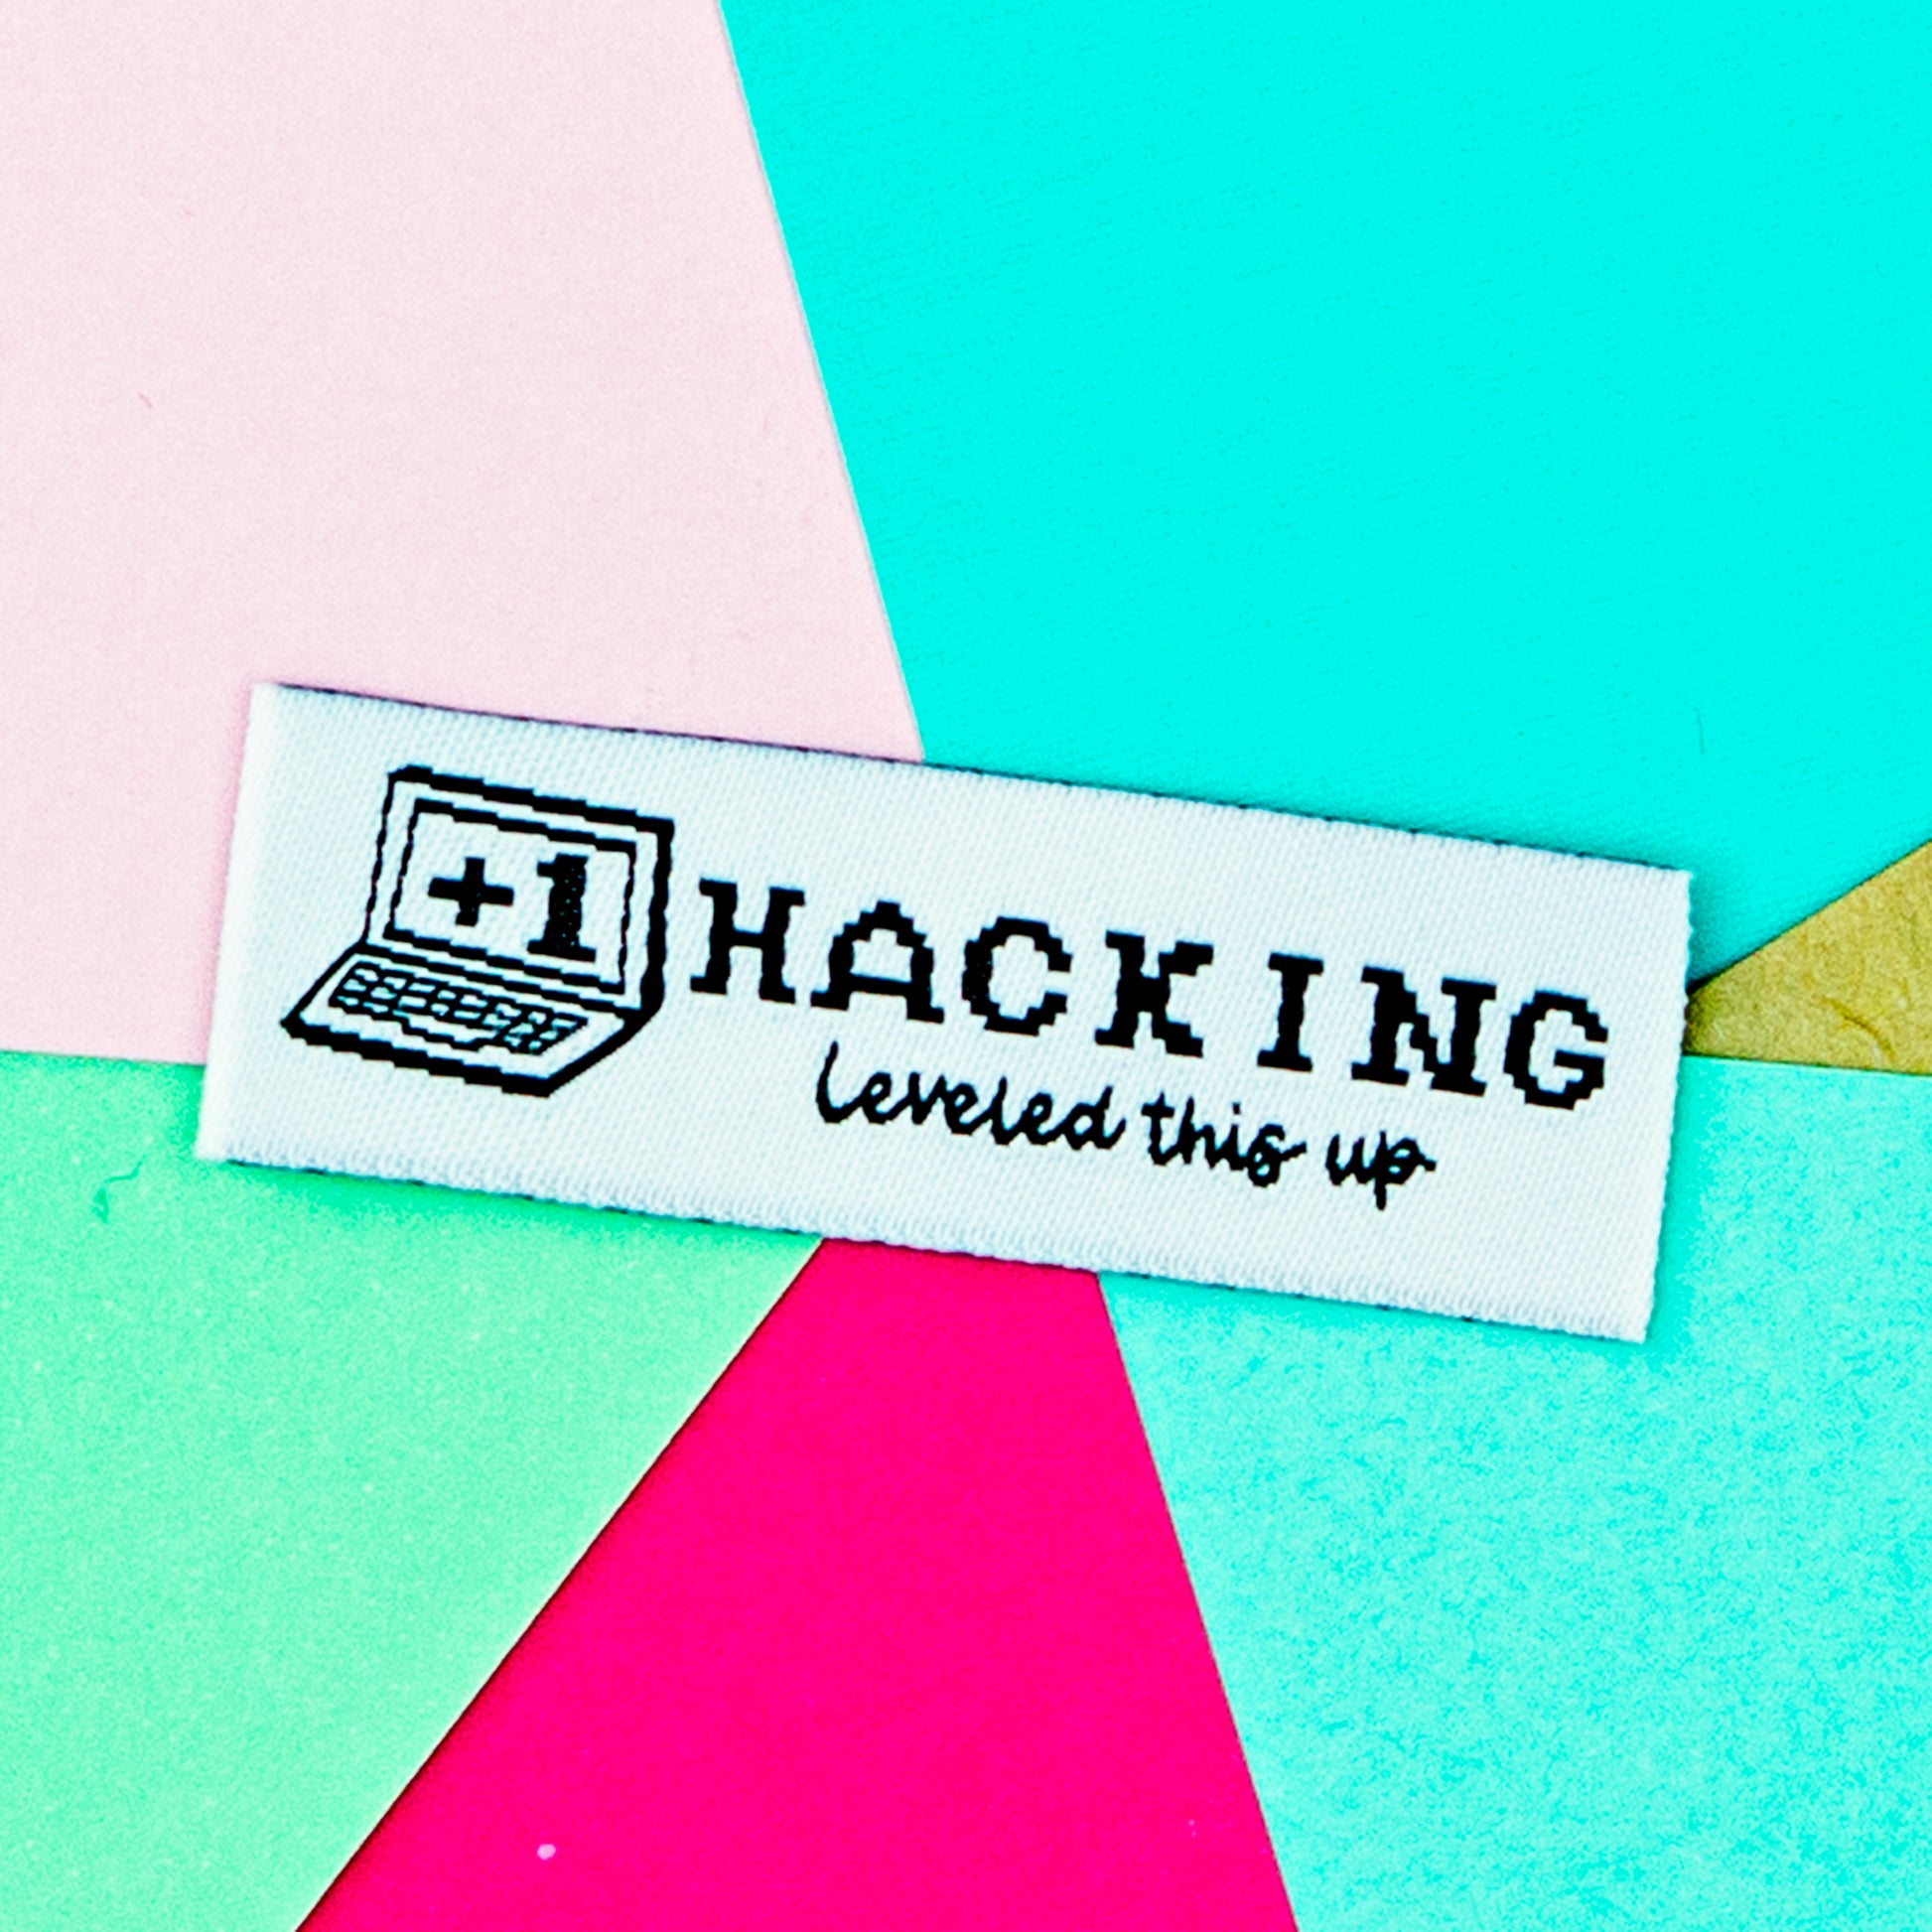 Hacked Sewing Labels - Let them know you modified it! – Fleece Fun